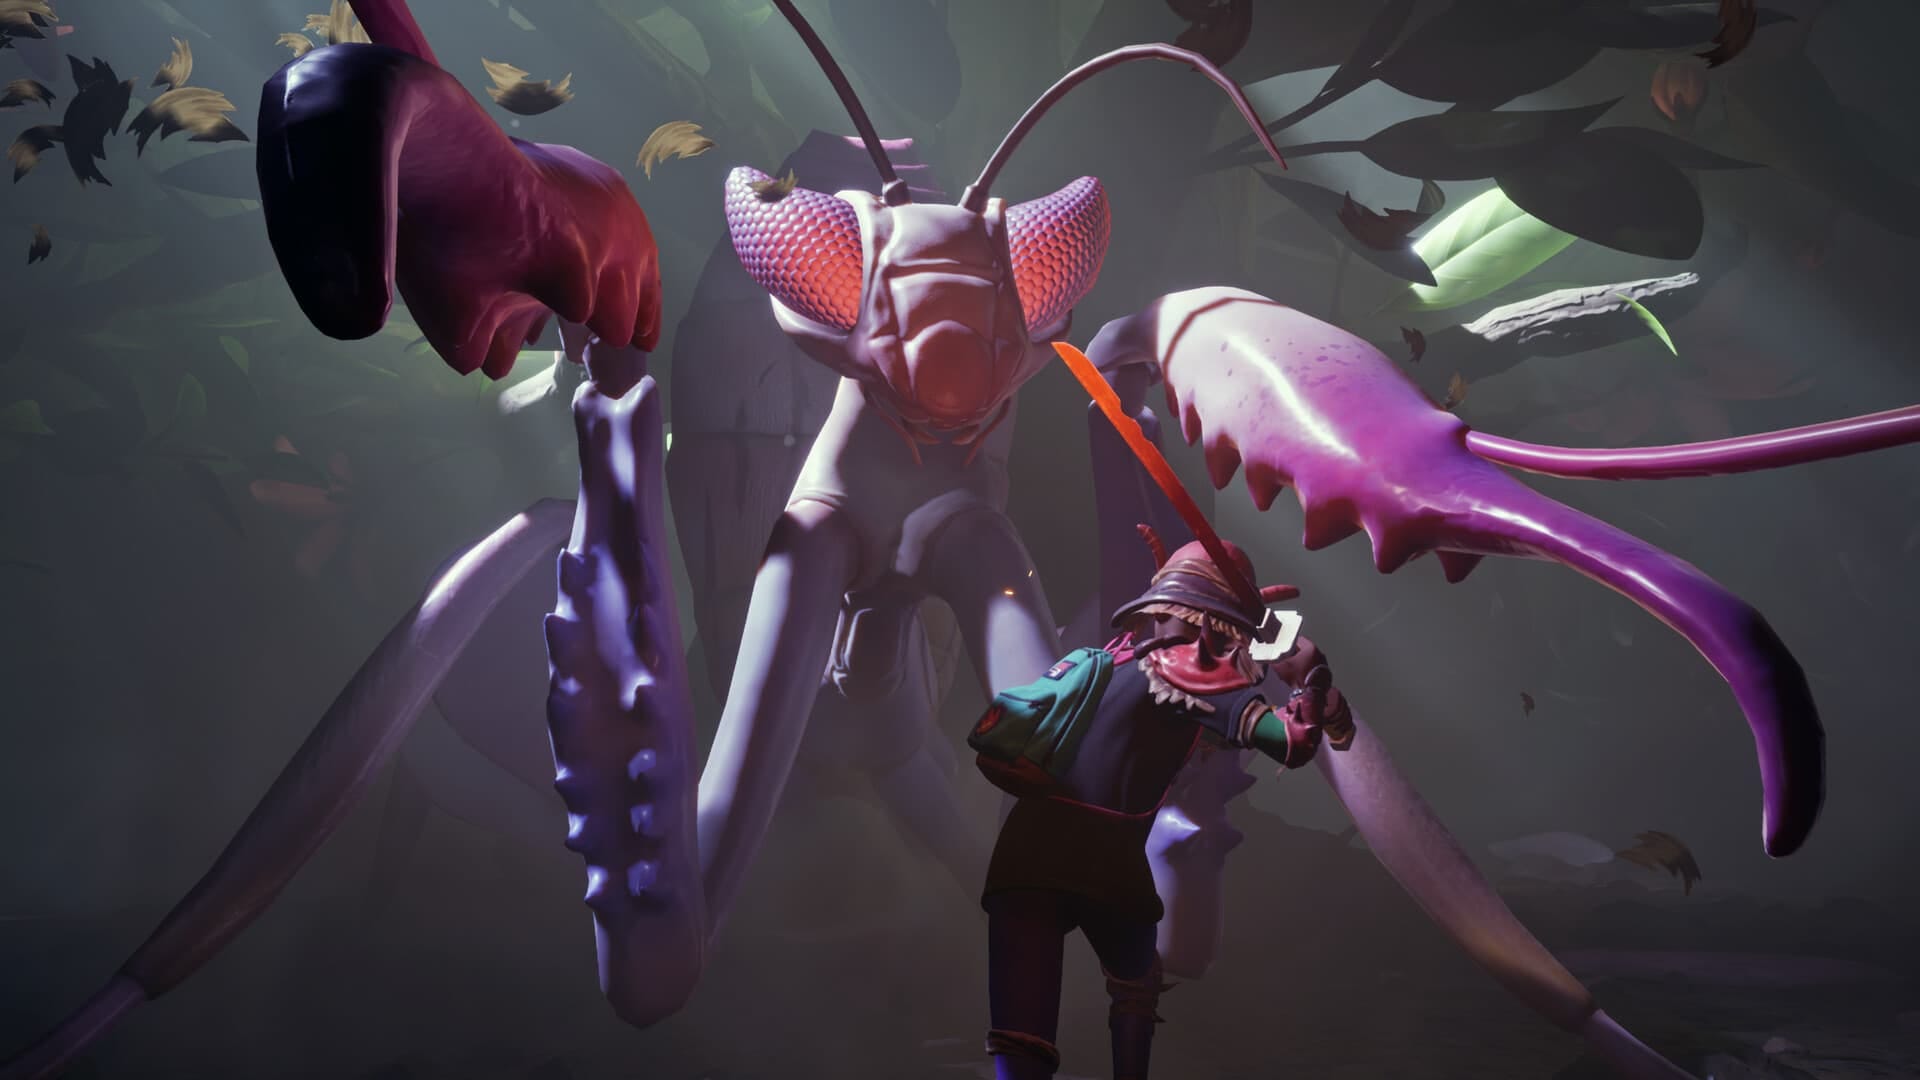 Grounded Screenshot from steam of the player slashing a large purple praying mantis with a sword